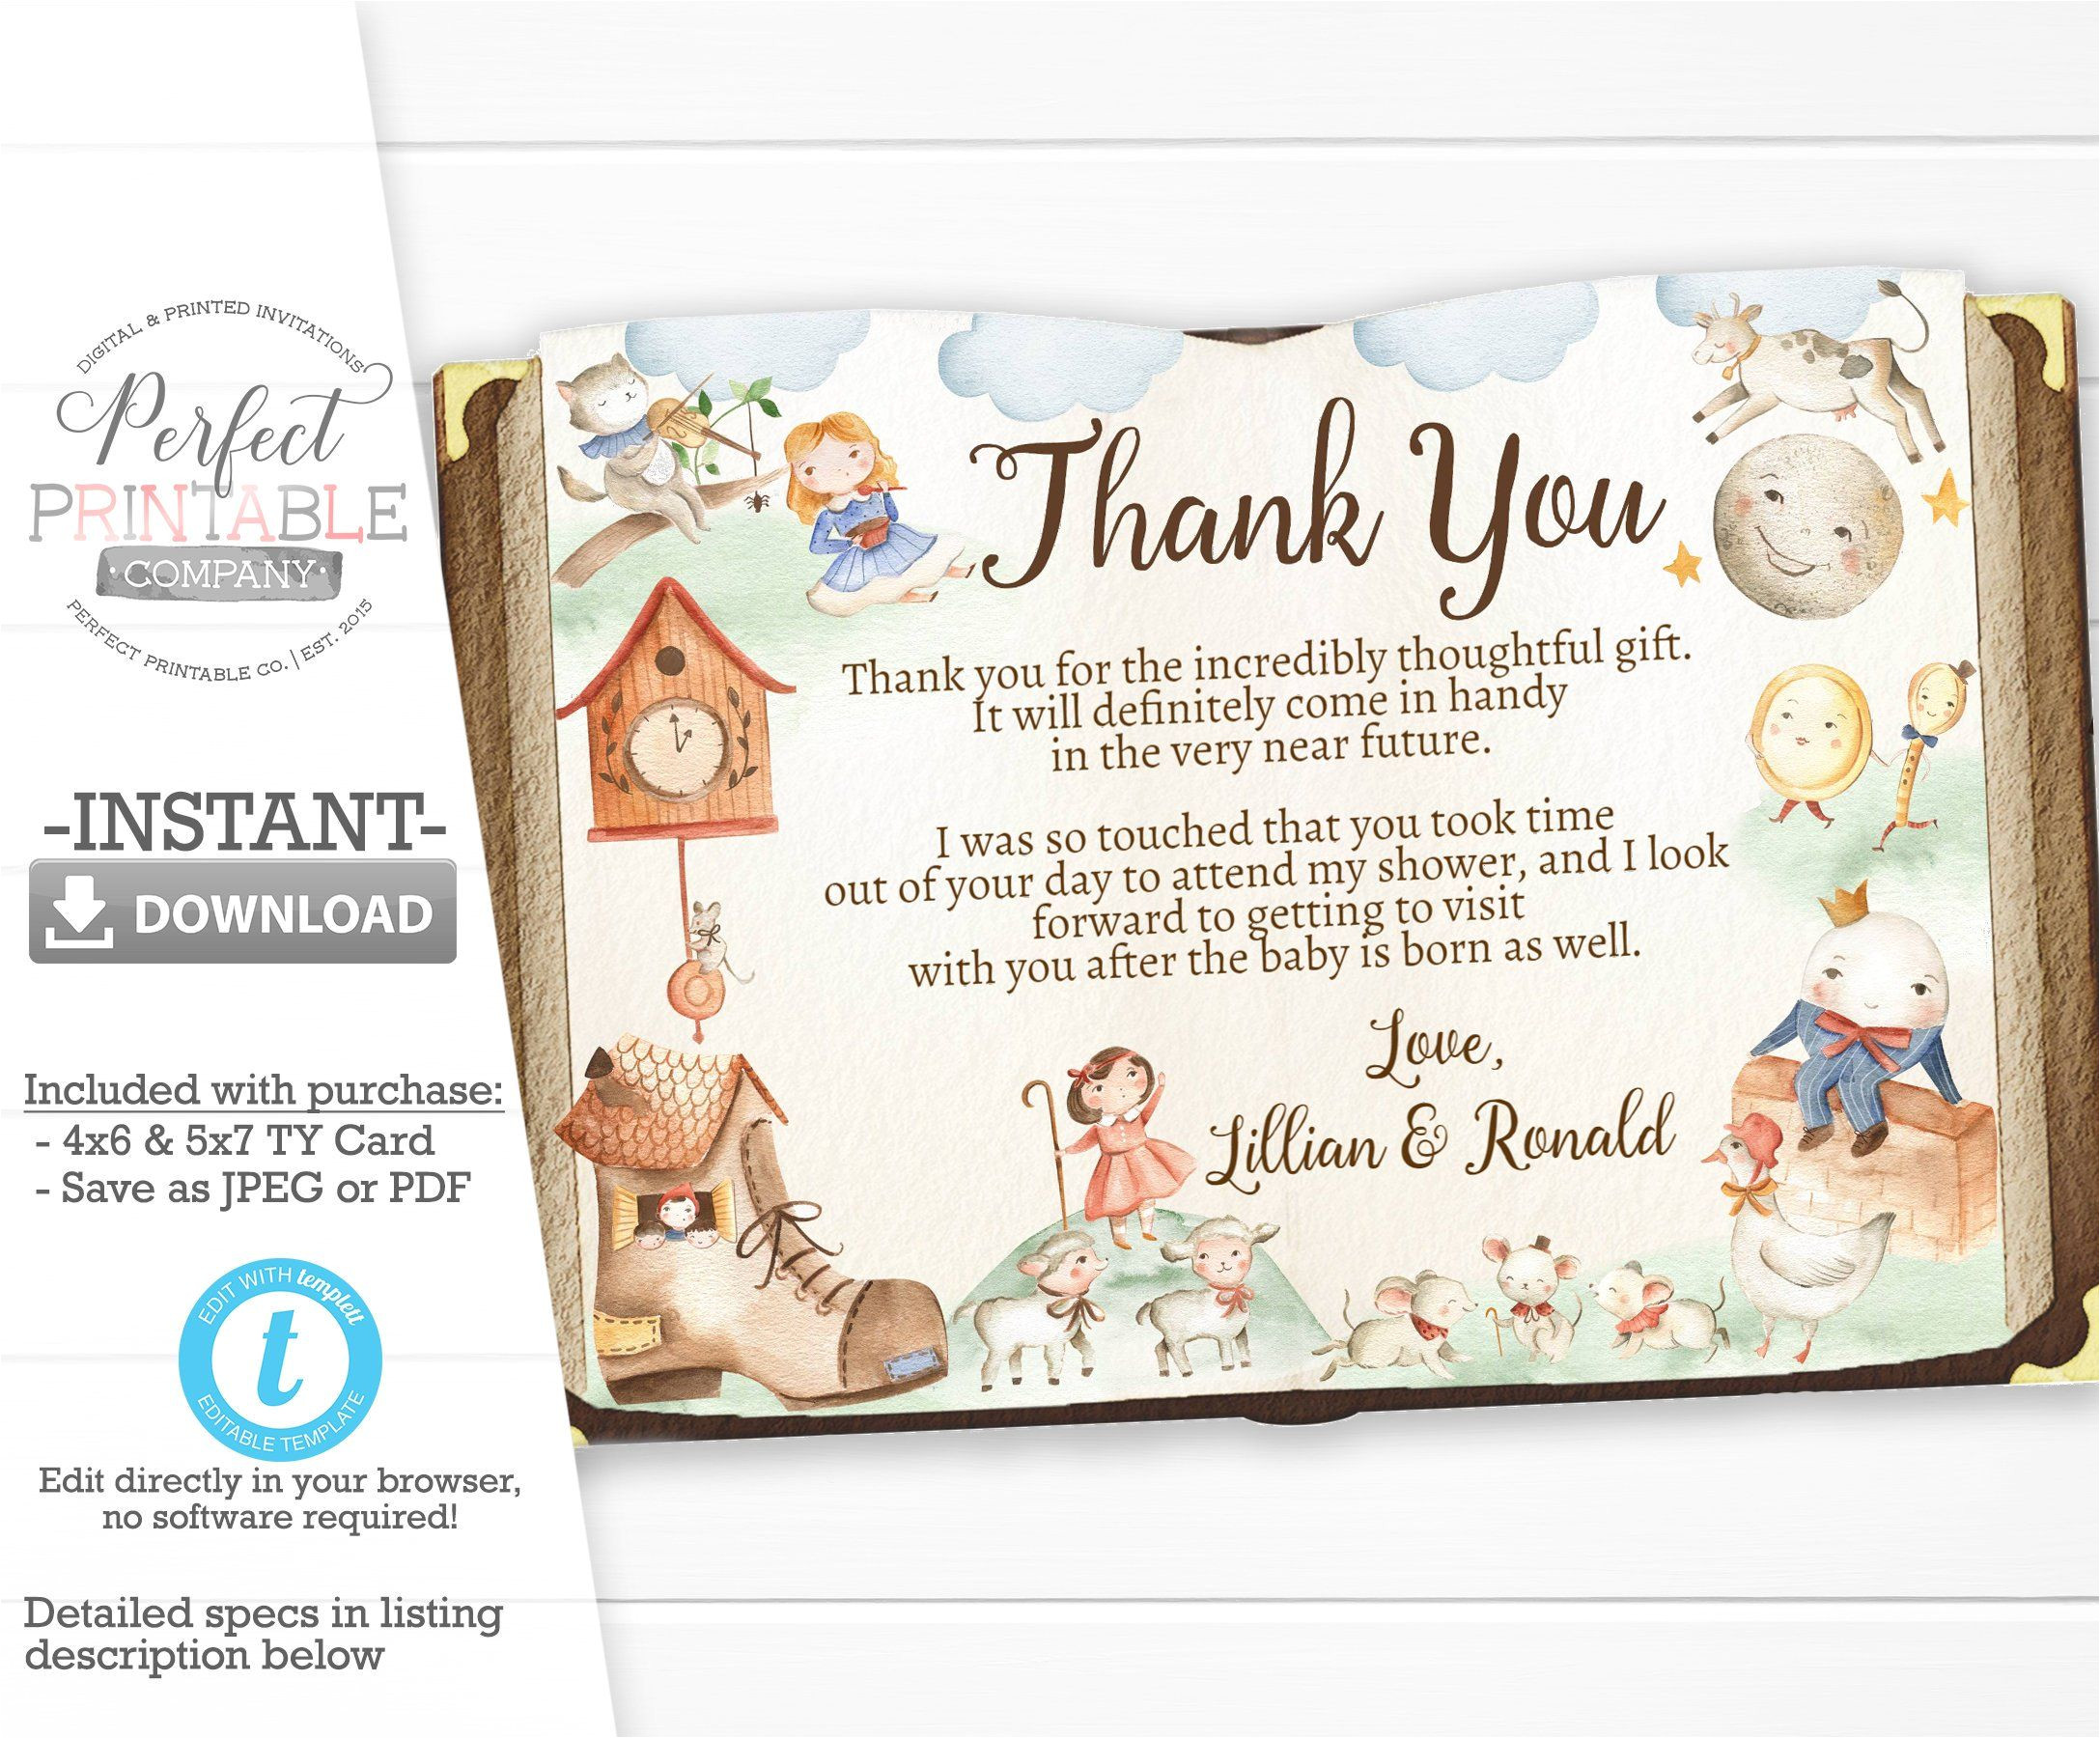 Thank You Card Birthday Template Nursery Rhyme Baby Shower Thank You Card Mother Goose Thank